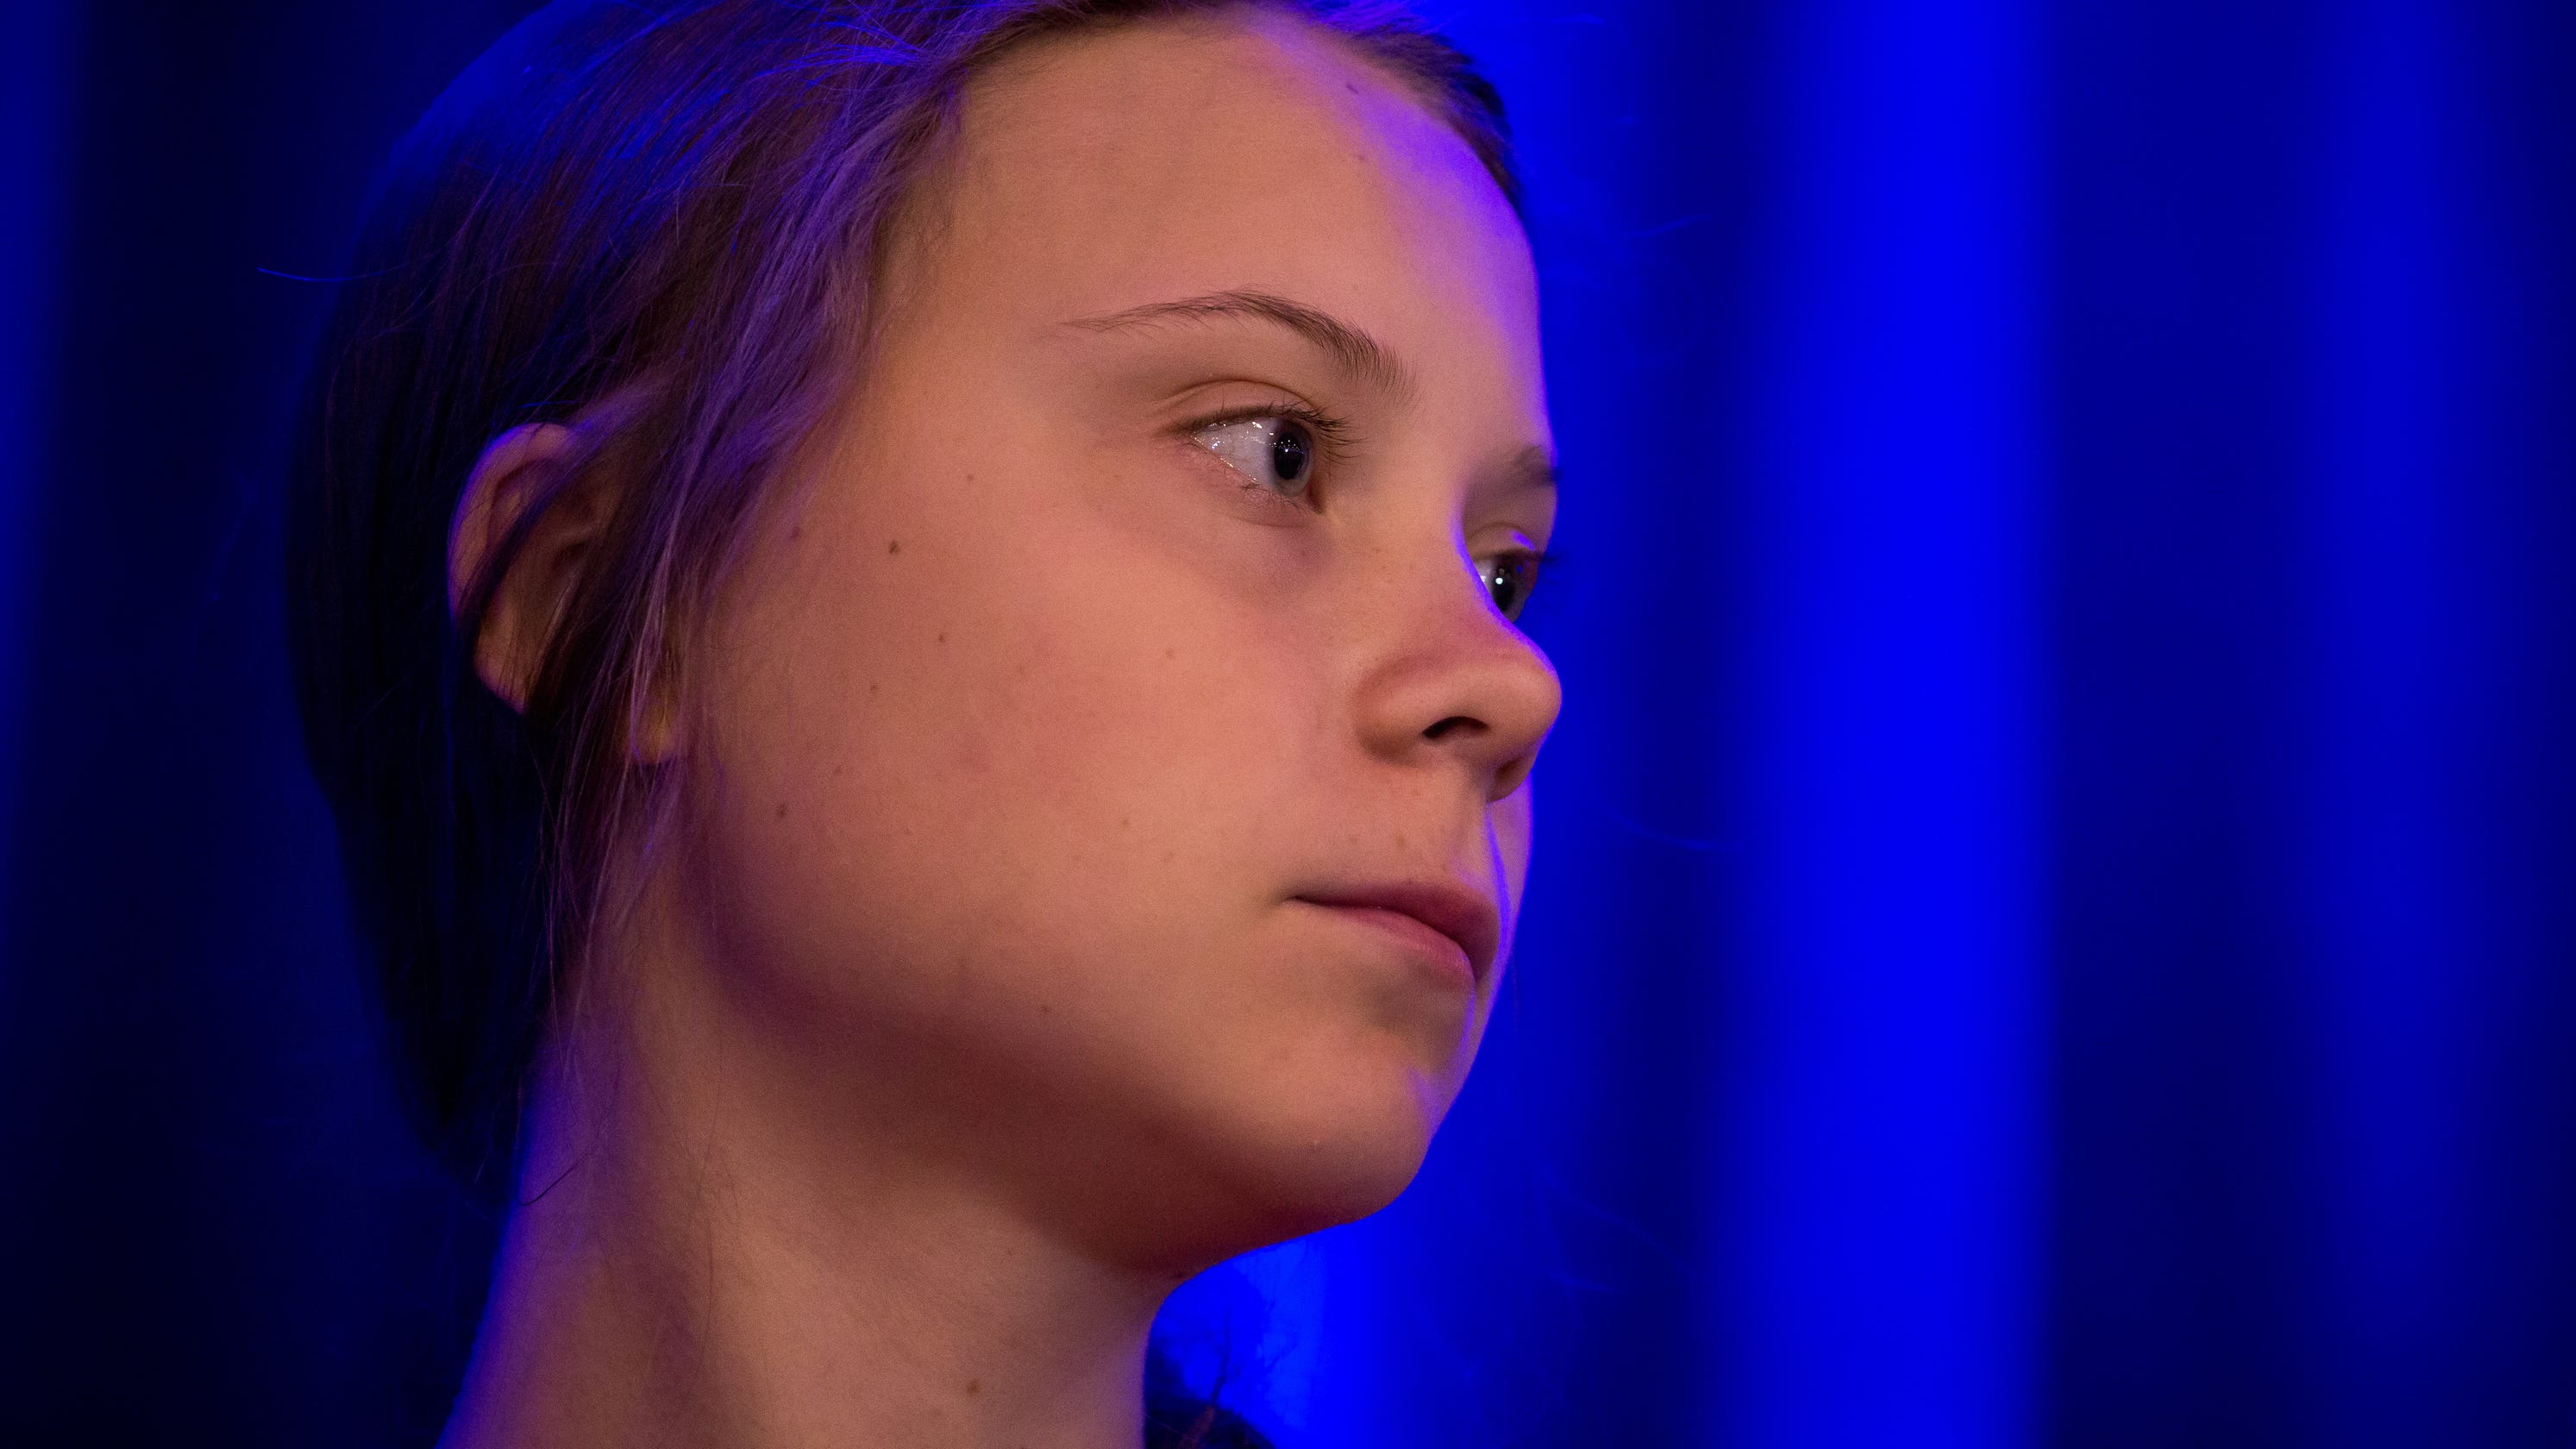 Fox News apologizes to Greta Thunberg after 'mentally ill' comment2987 x 1680